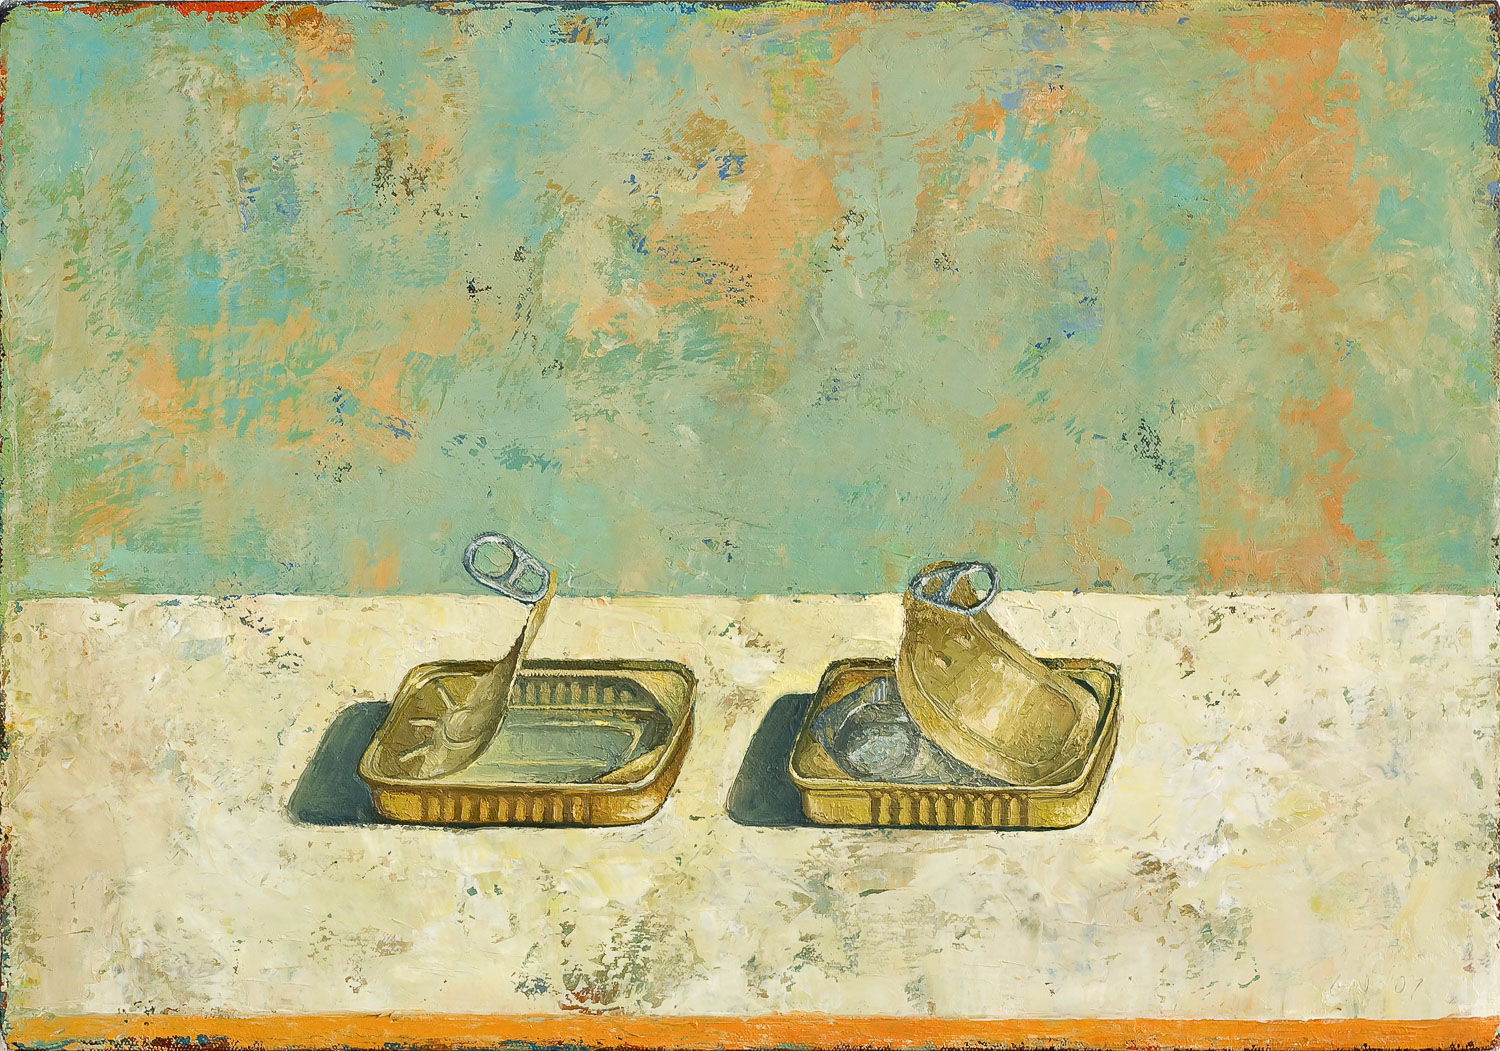   Two Sardine Cans  2007 oil on canvas 14 x 20 inches  Private collection 